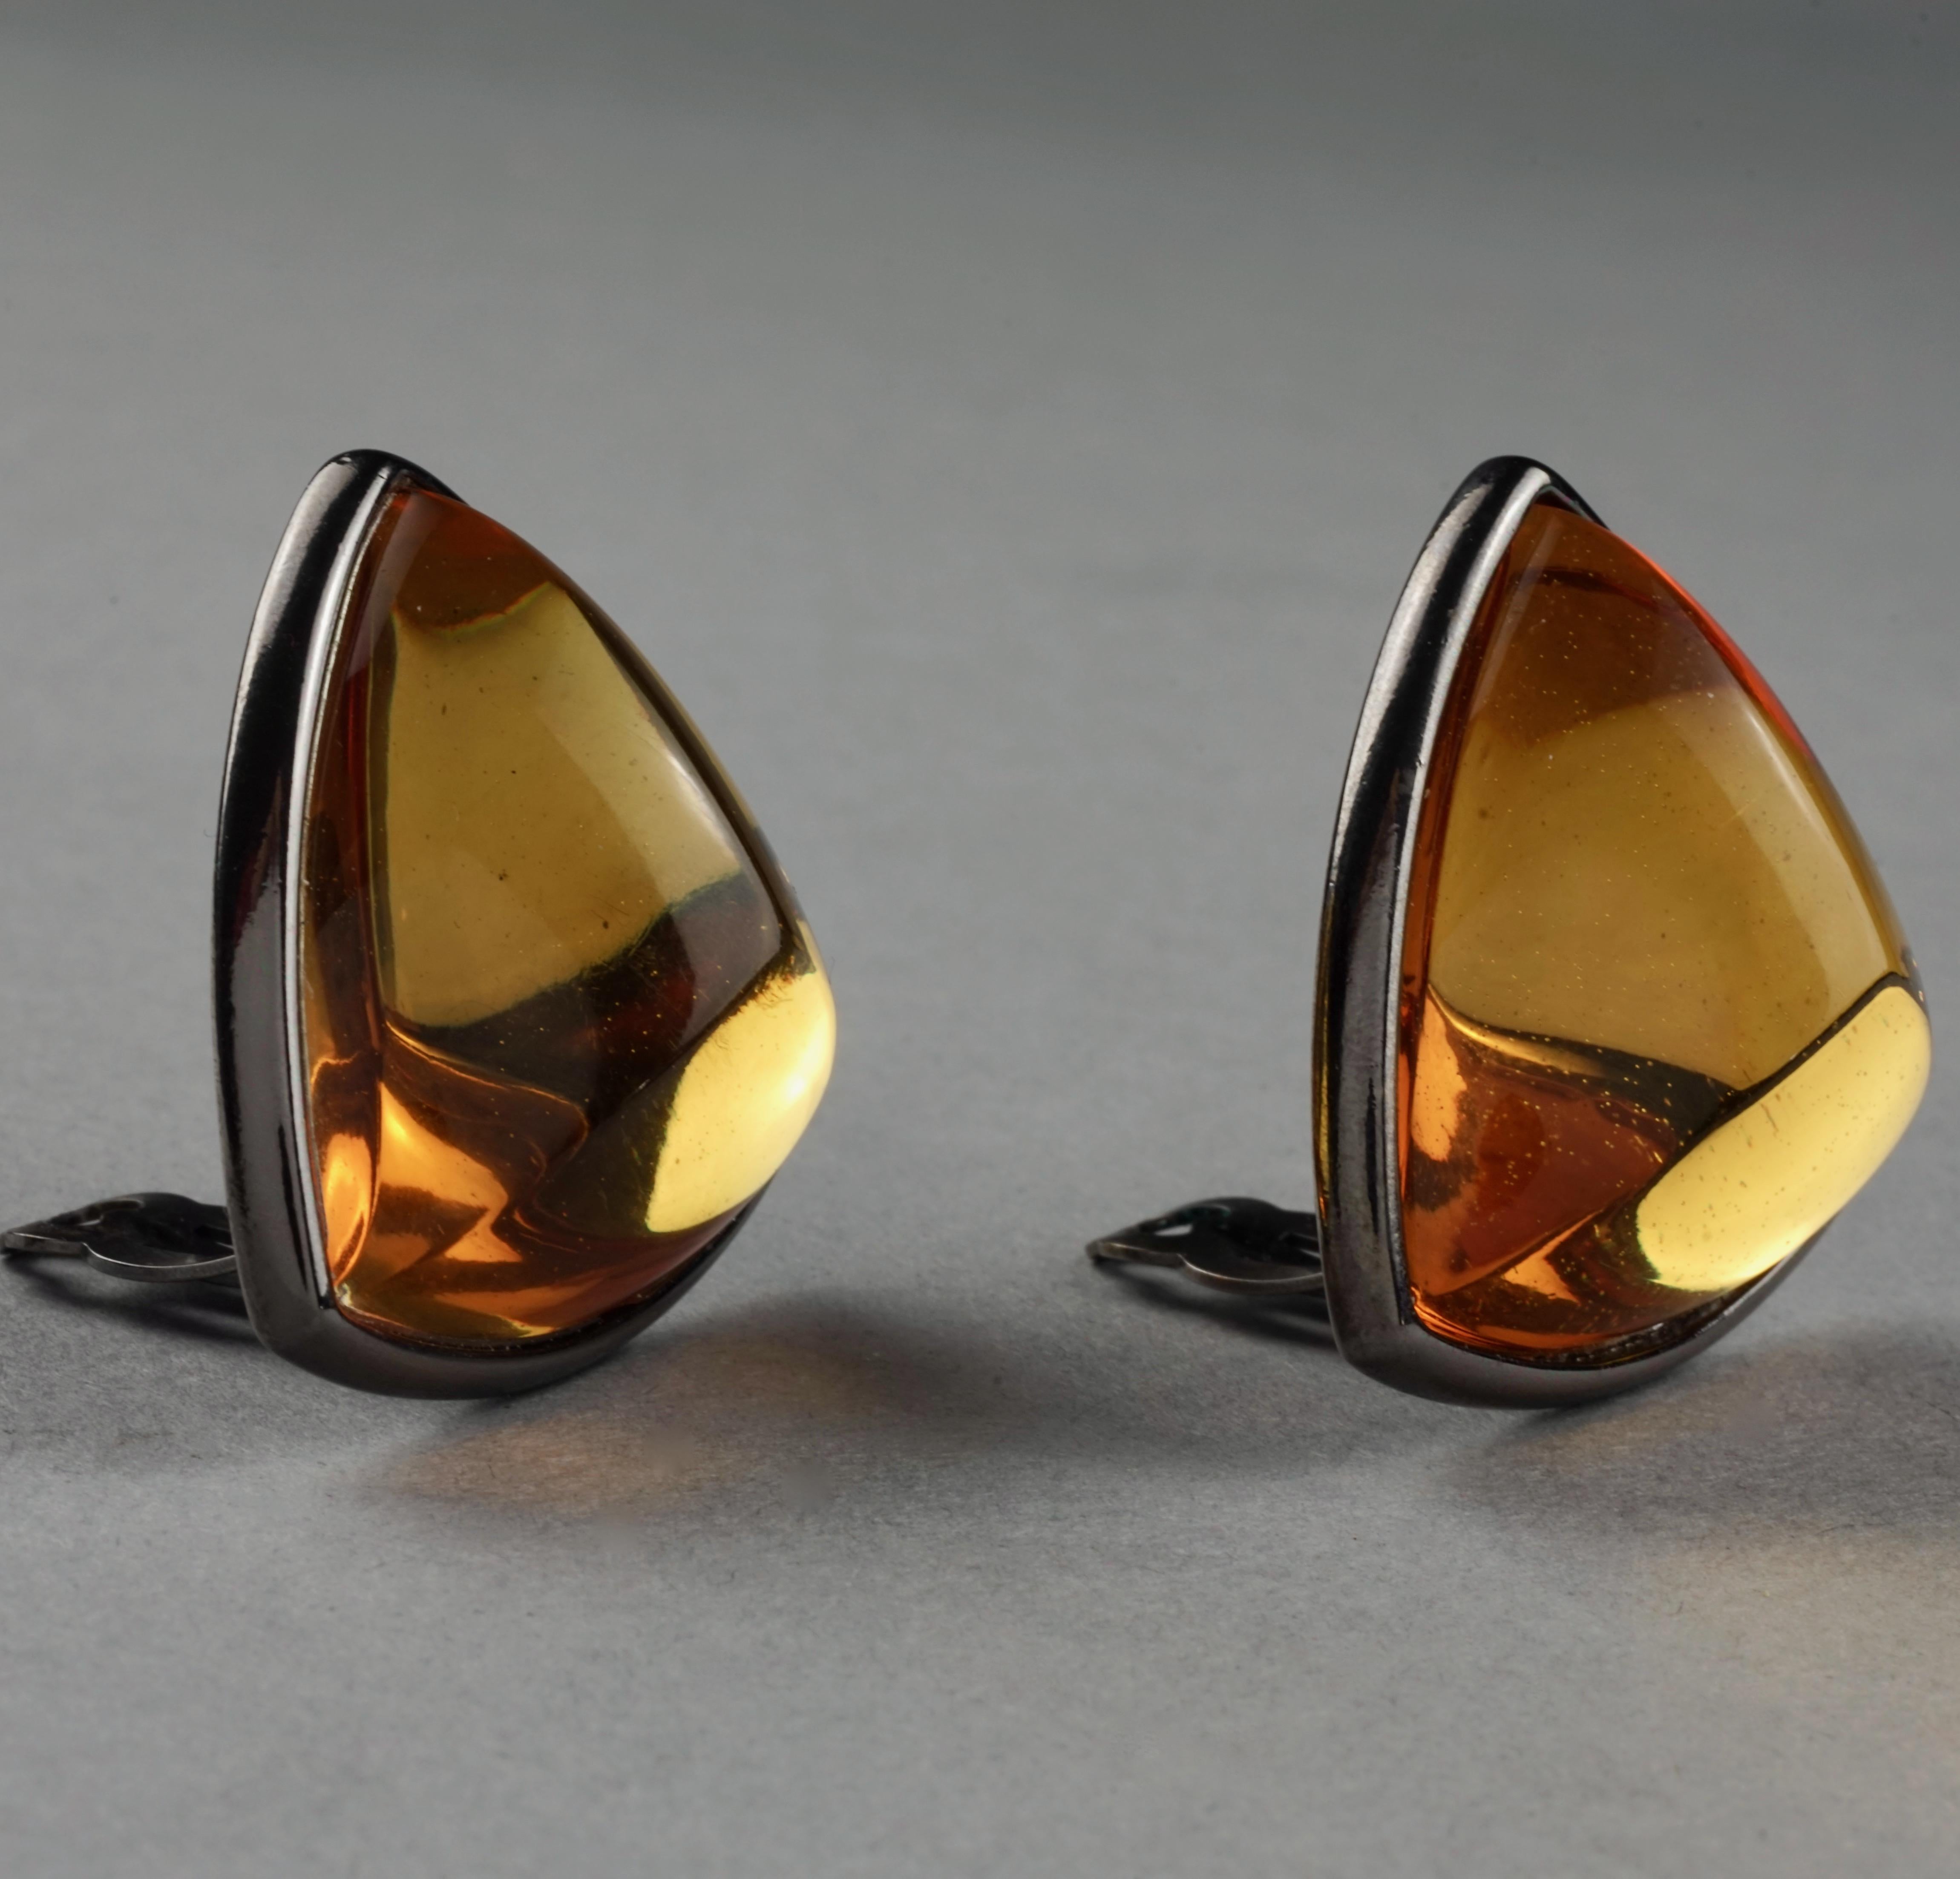 Vintage YVES SAINT LAURENT Ysl Triangle Amber Cabochon Earrings In Excellent Condition For Sale In Kingersheim, Alsace